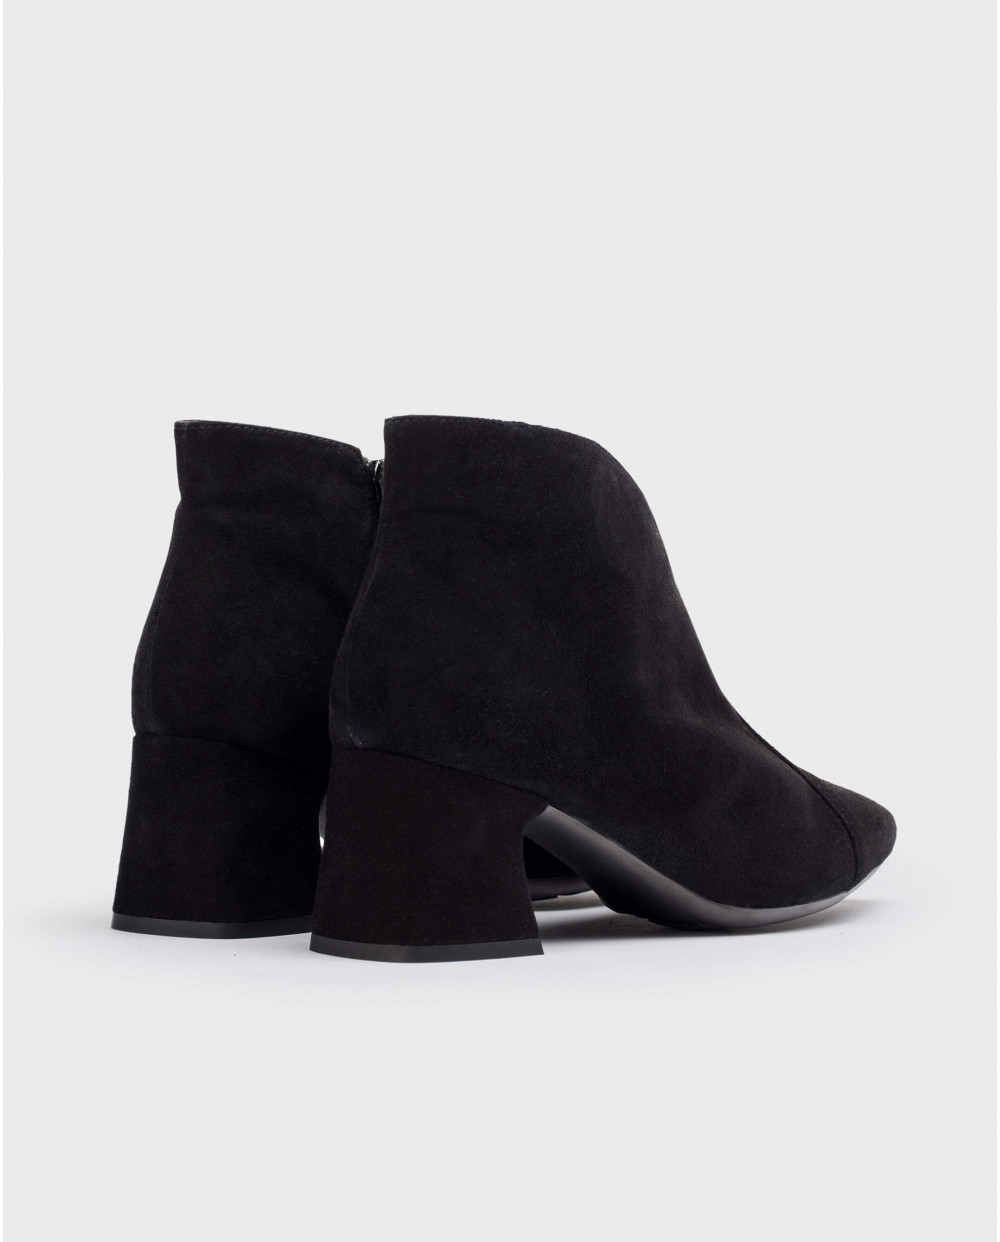 Wonders-Ankle Boots-Black ELIOT ankle boot